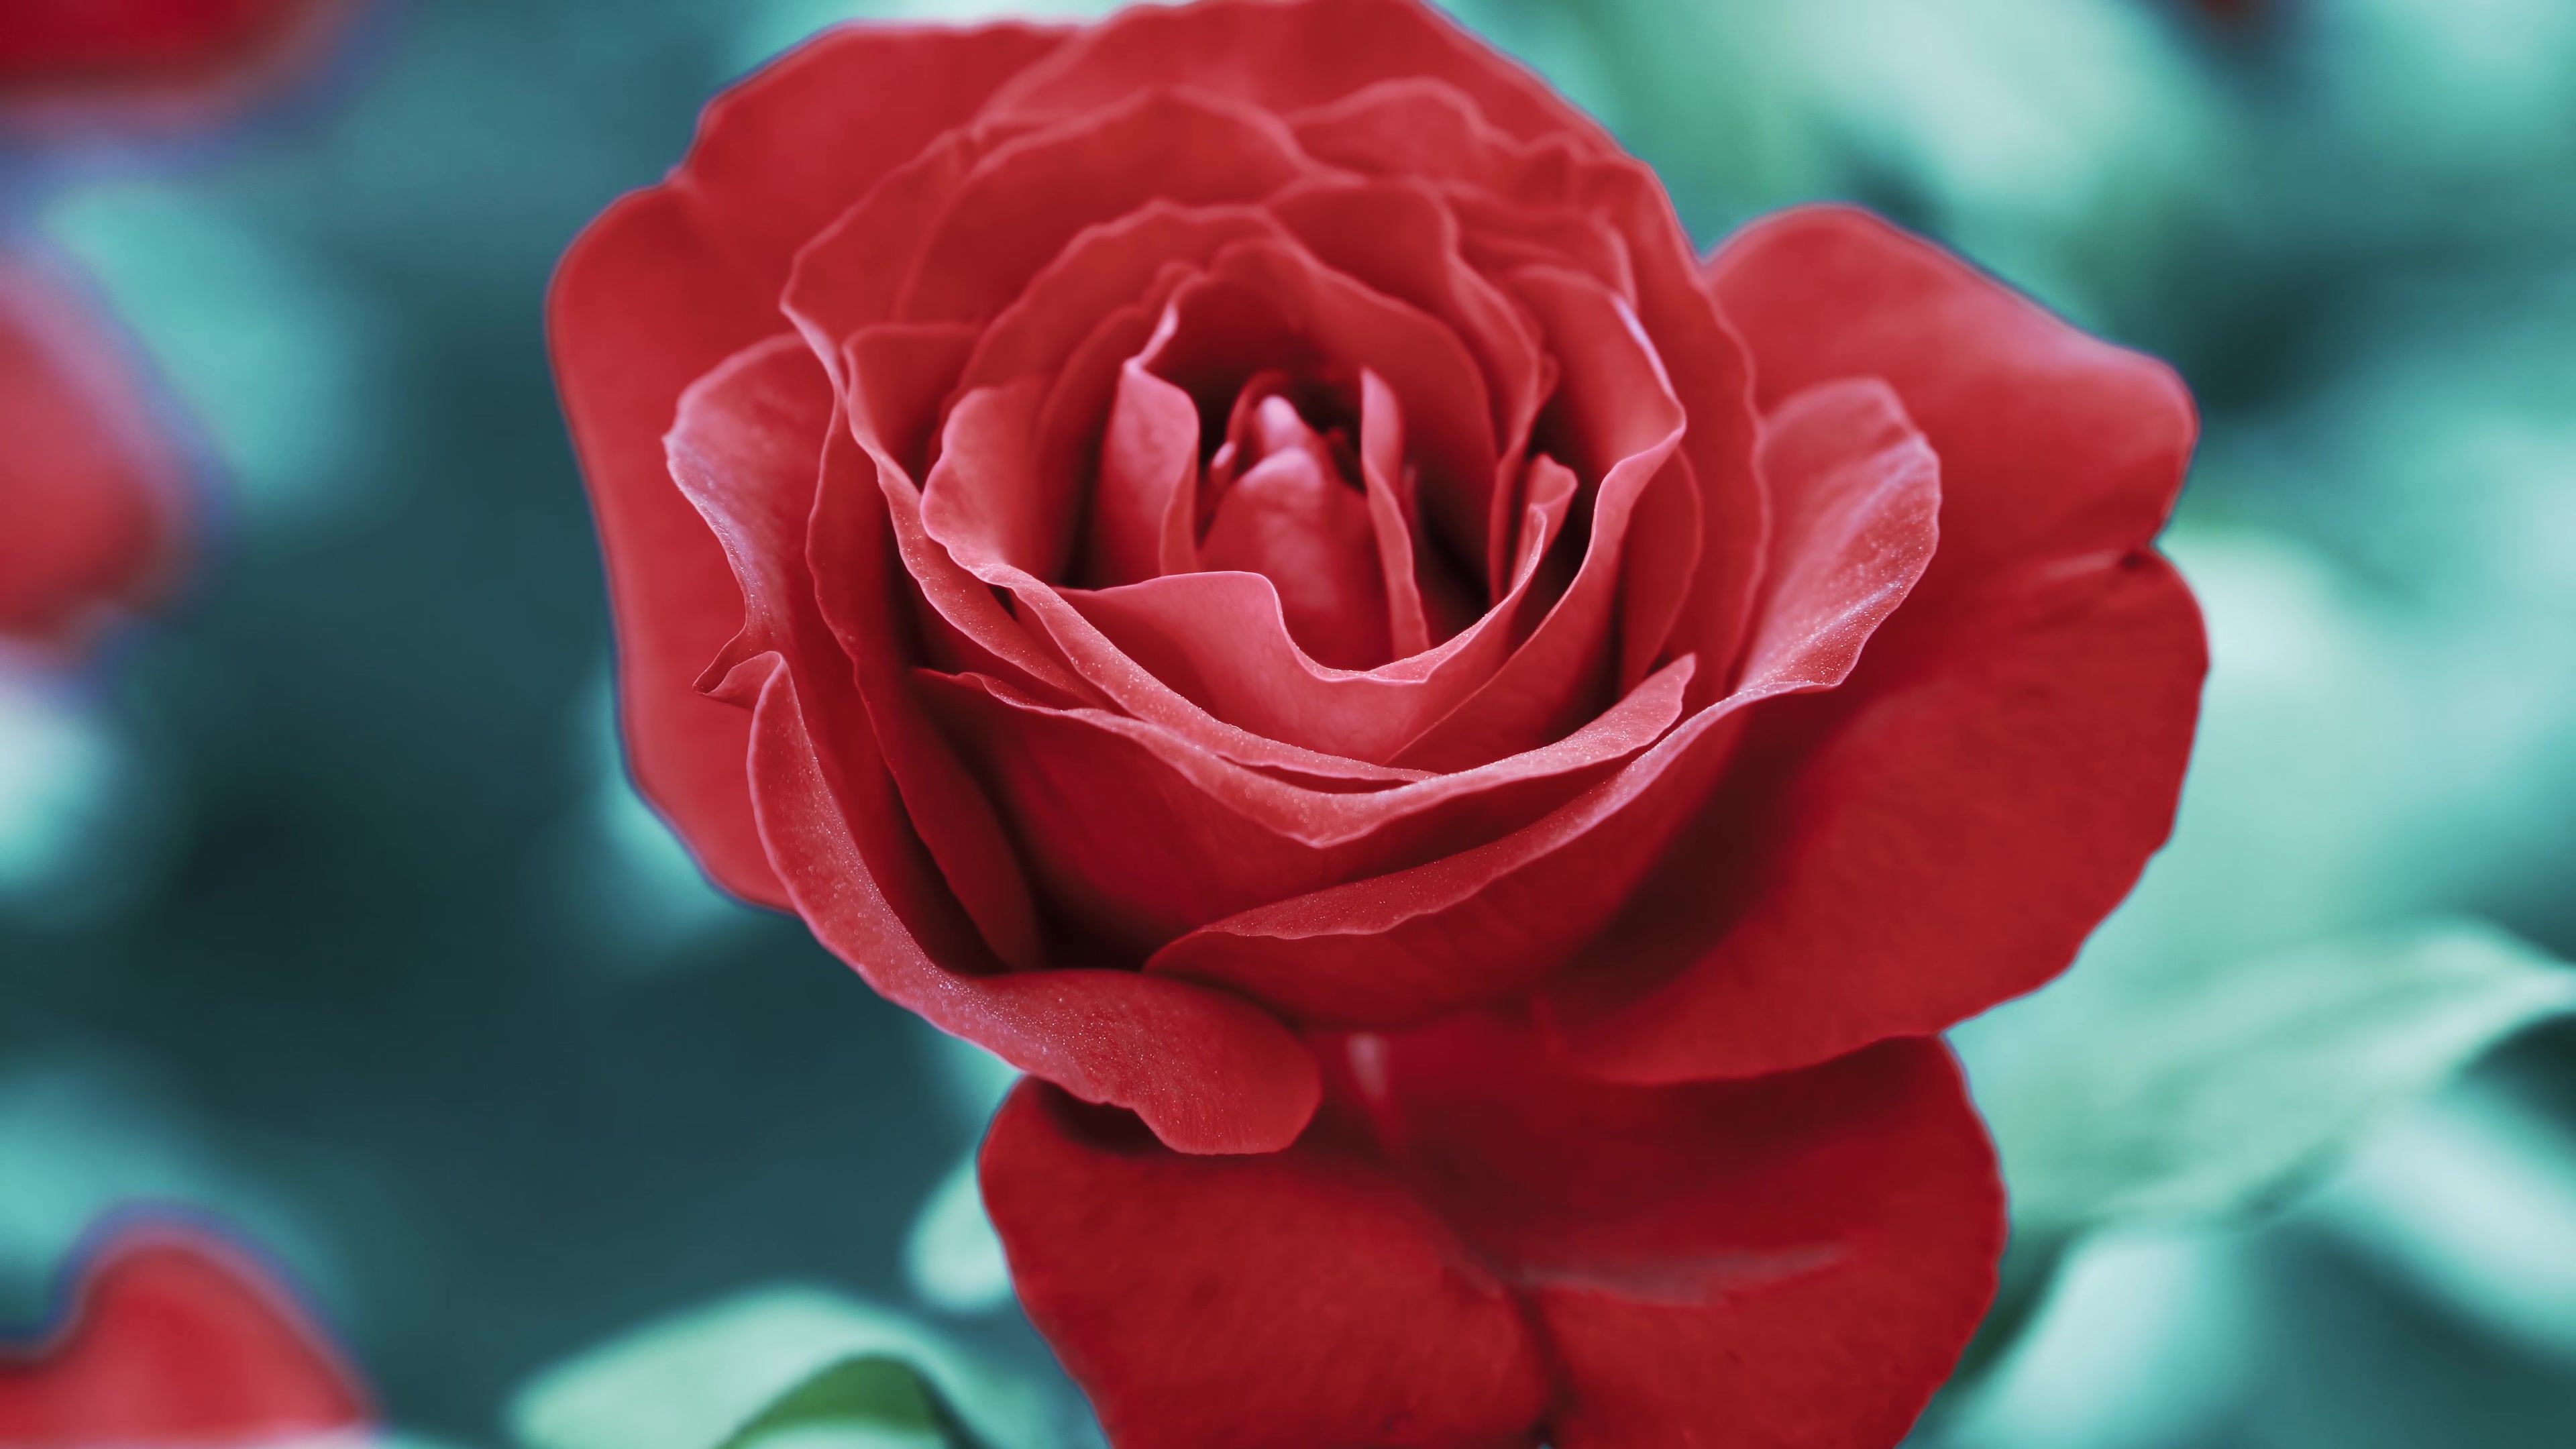 Red Rose Flower 4K Ultra HD Wallpaper, Photo, Picture or Image